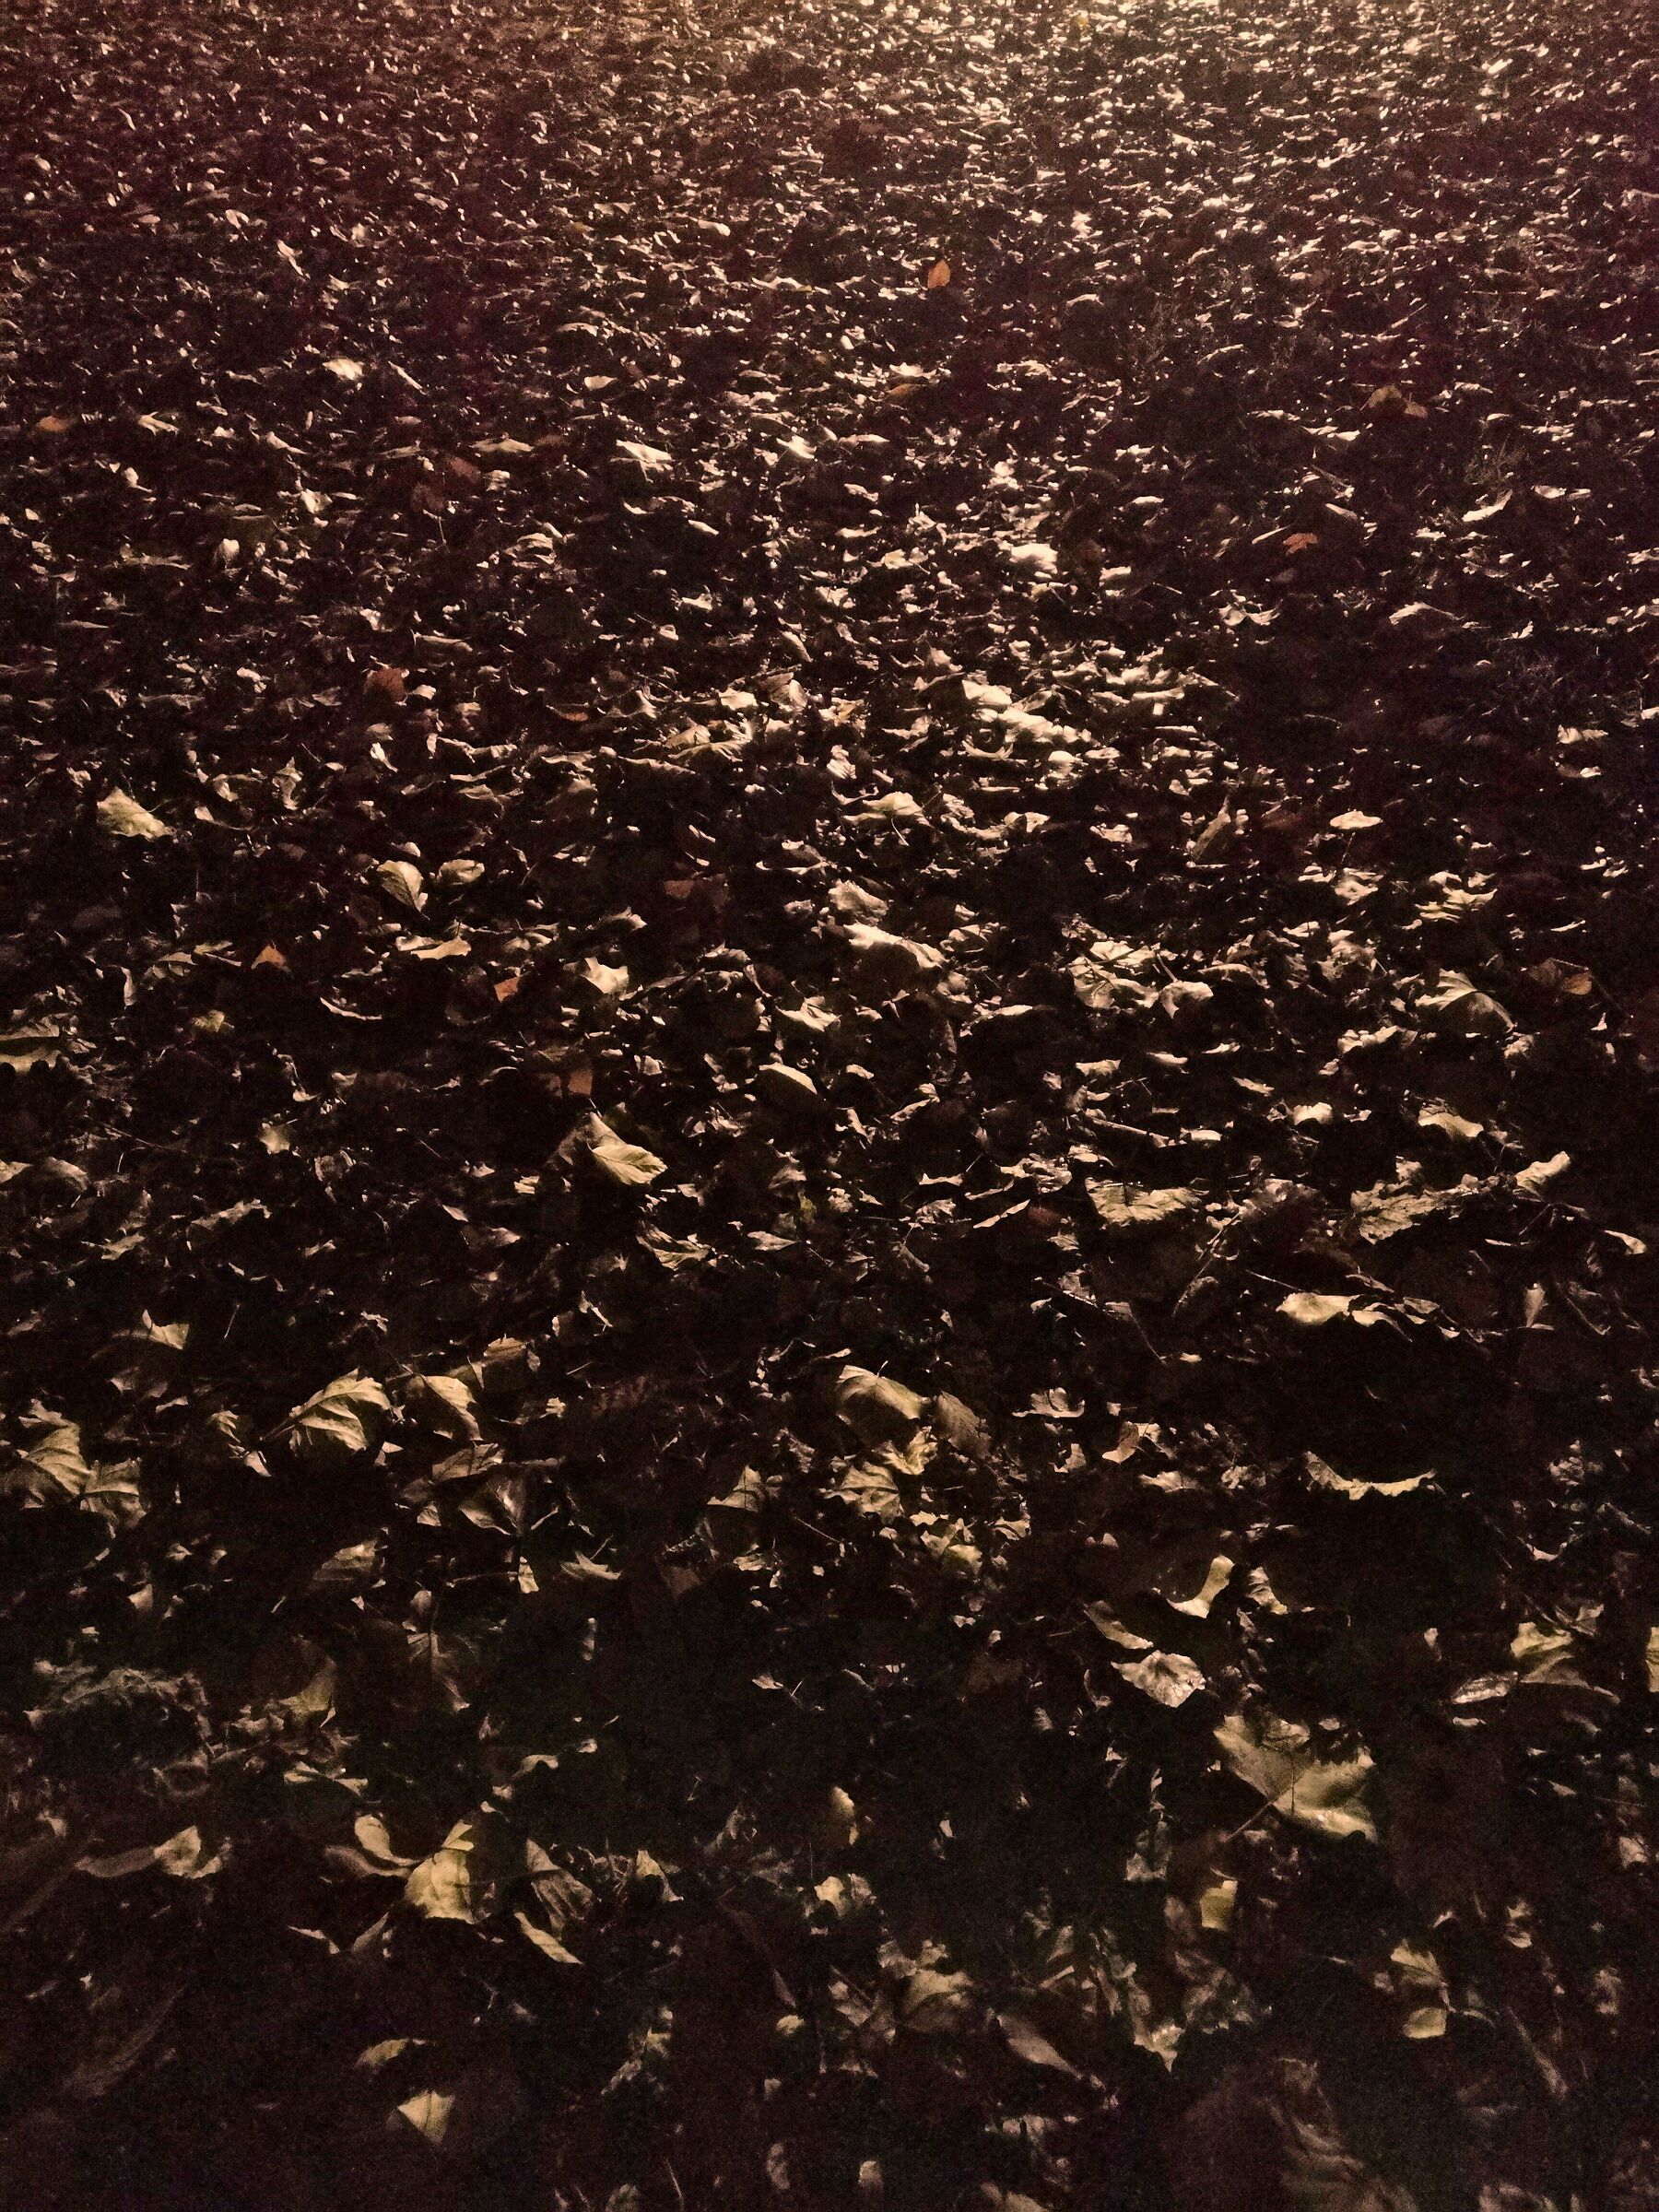 Carpet of fallen leaves in the evening...